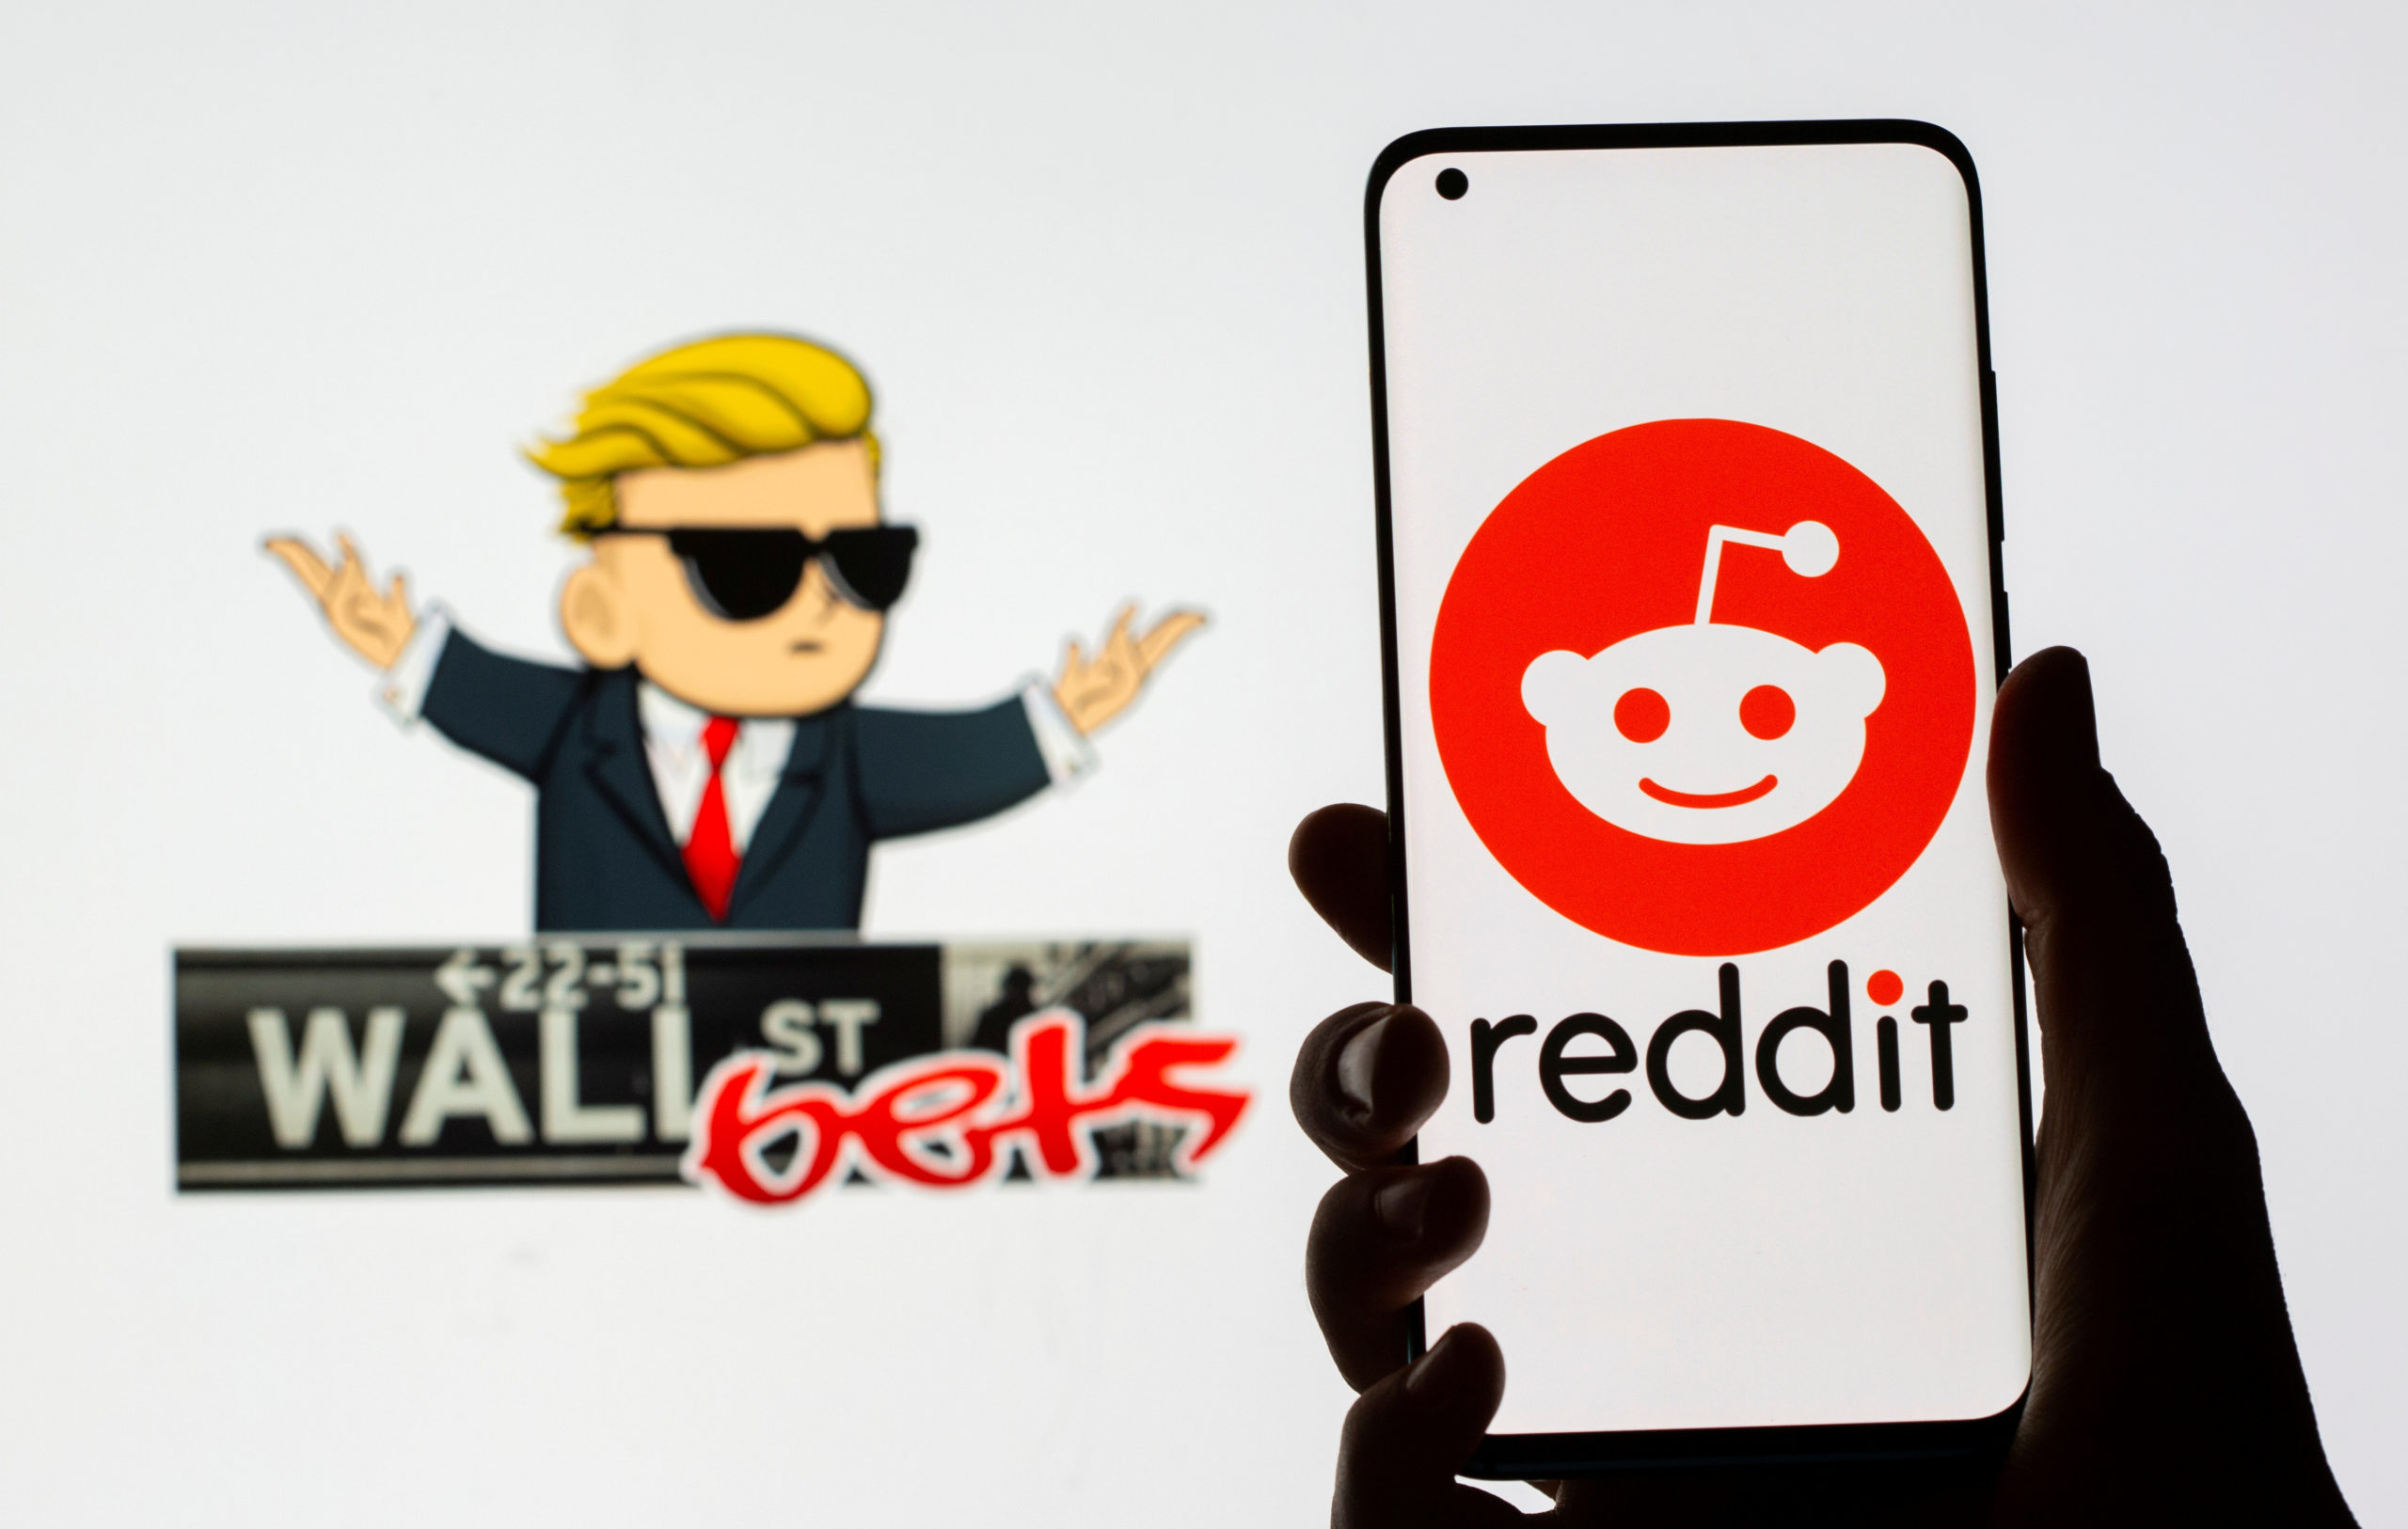 Power to the players: Wall Street levels up in Reddit rally